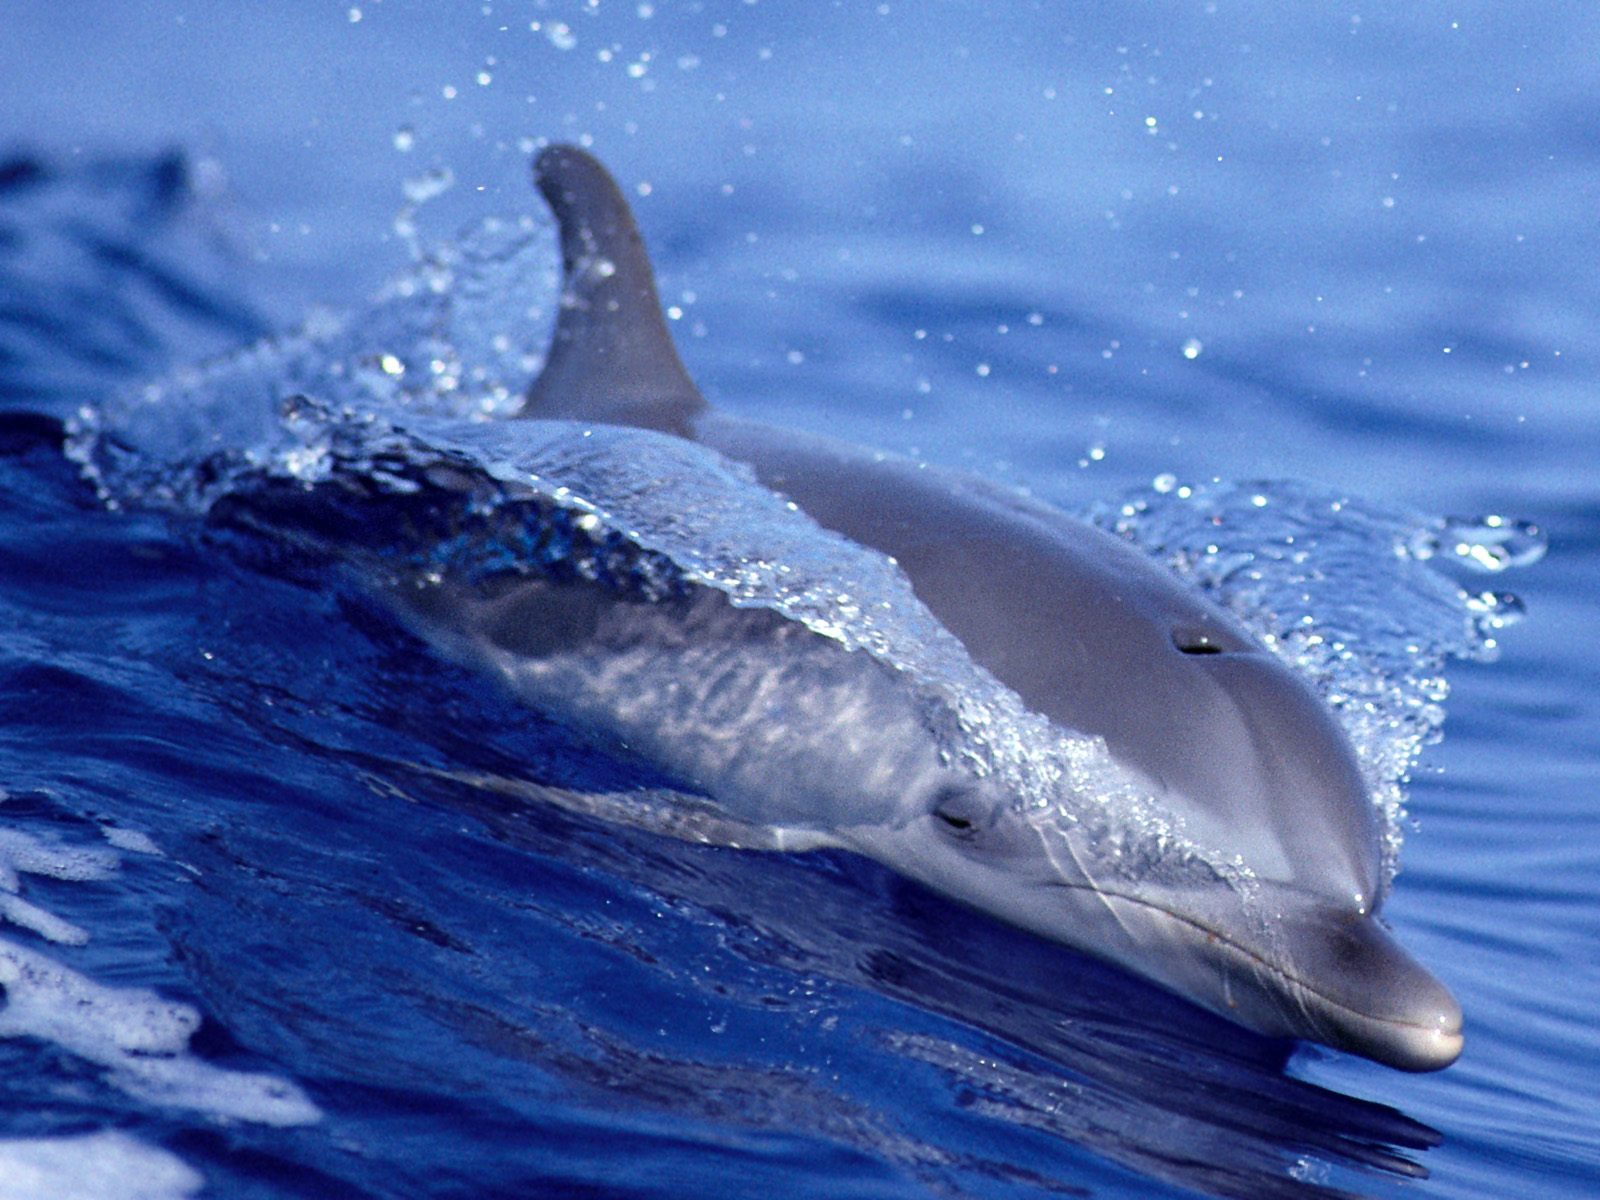 Hd Dolphin Wallpapers Animal Photo HD Wallpapers Download Free Map Images Wallpaper [wallpaper376.blogspot.com]